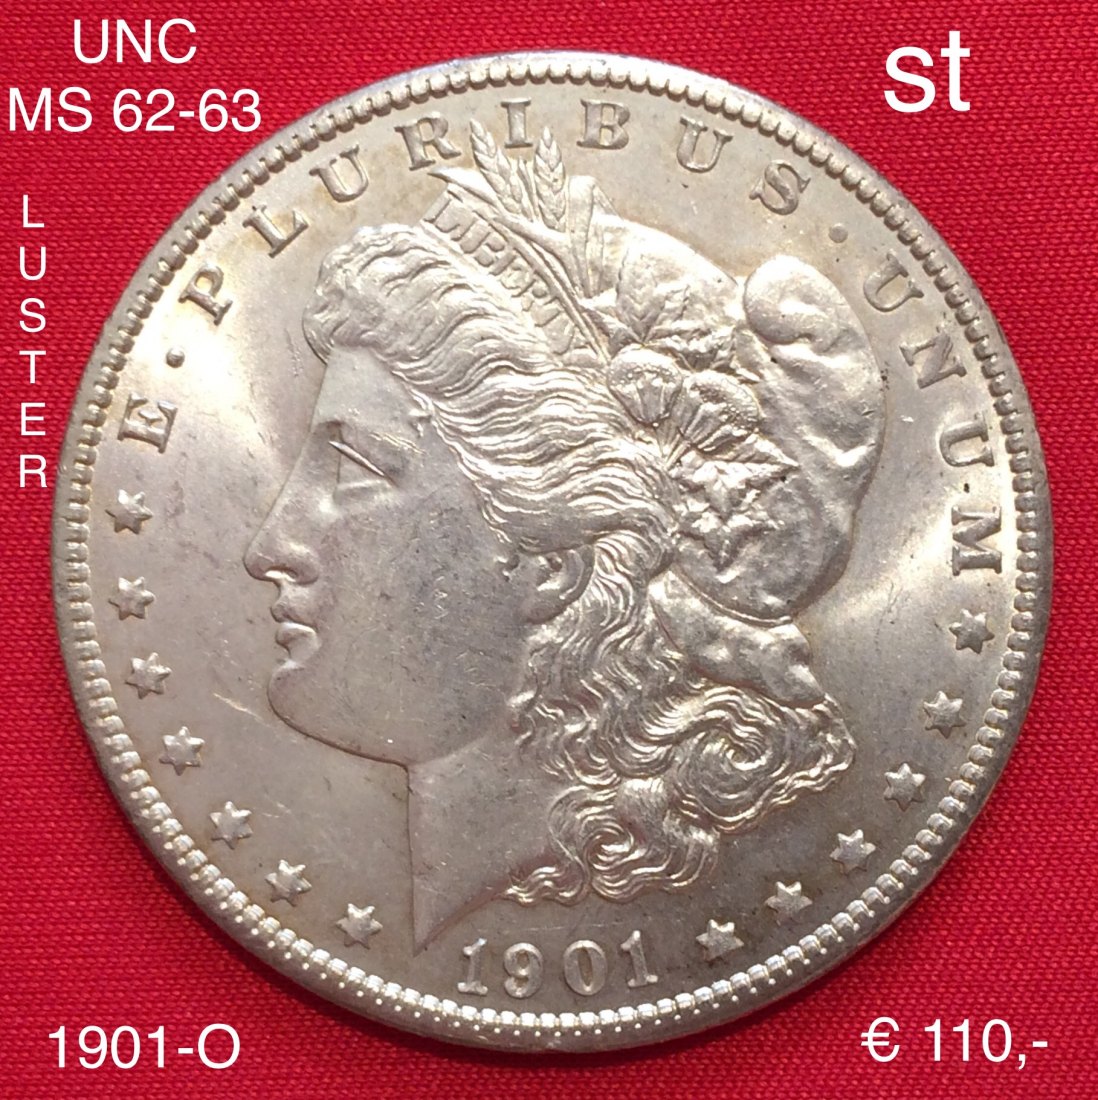  USA 1901-O Morgan Silver Dollar st / UNC MS 62-63 with flashy and bright Mint Luster   